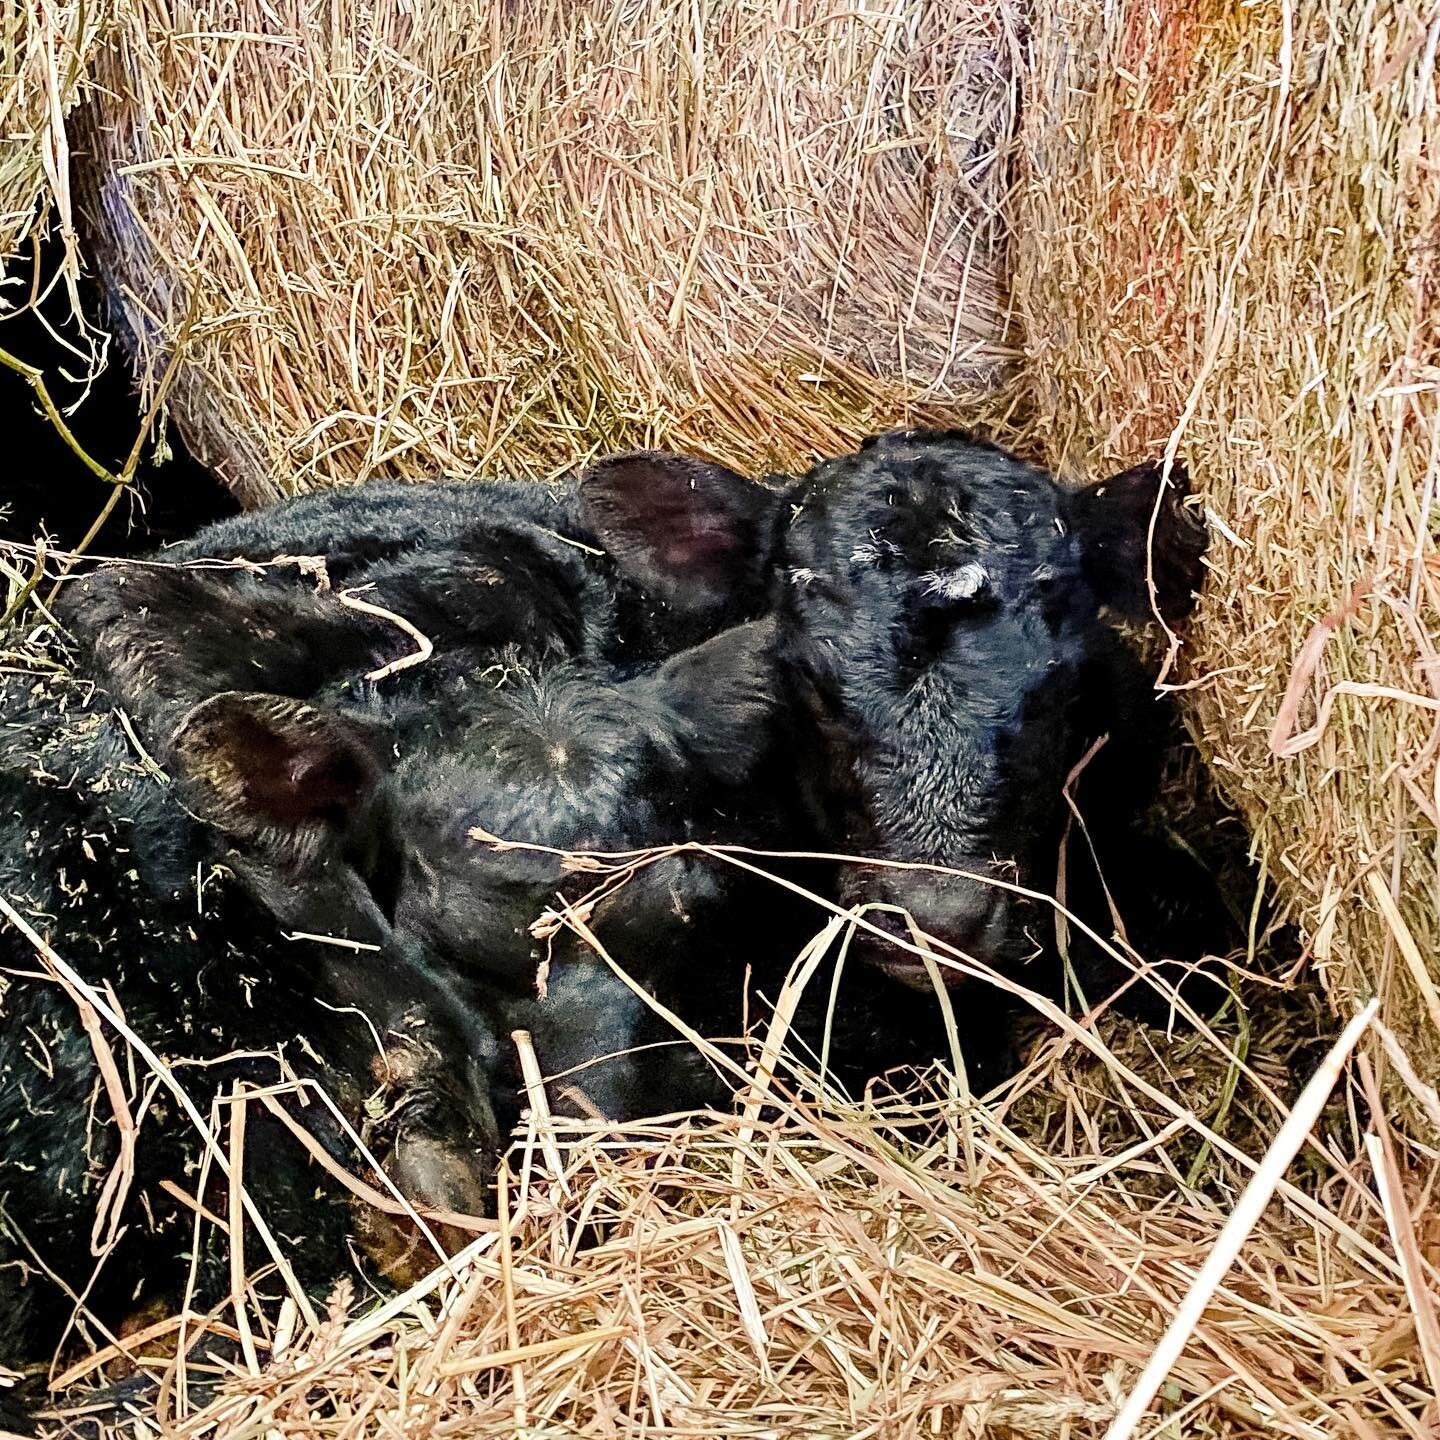 I found the twins cuddled up in a corner of the barn. The little bull calf with the white flecks on his face had his leg wrapped around his brother as they slept in the hay.

It was almost as if he was saying &ldquo;It&rsquo;s a big ole world out the